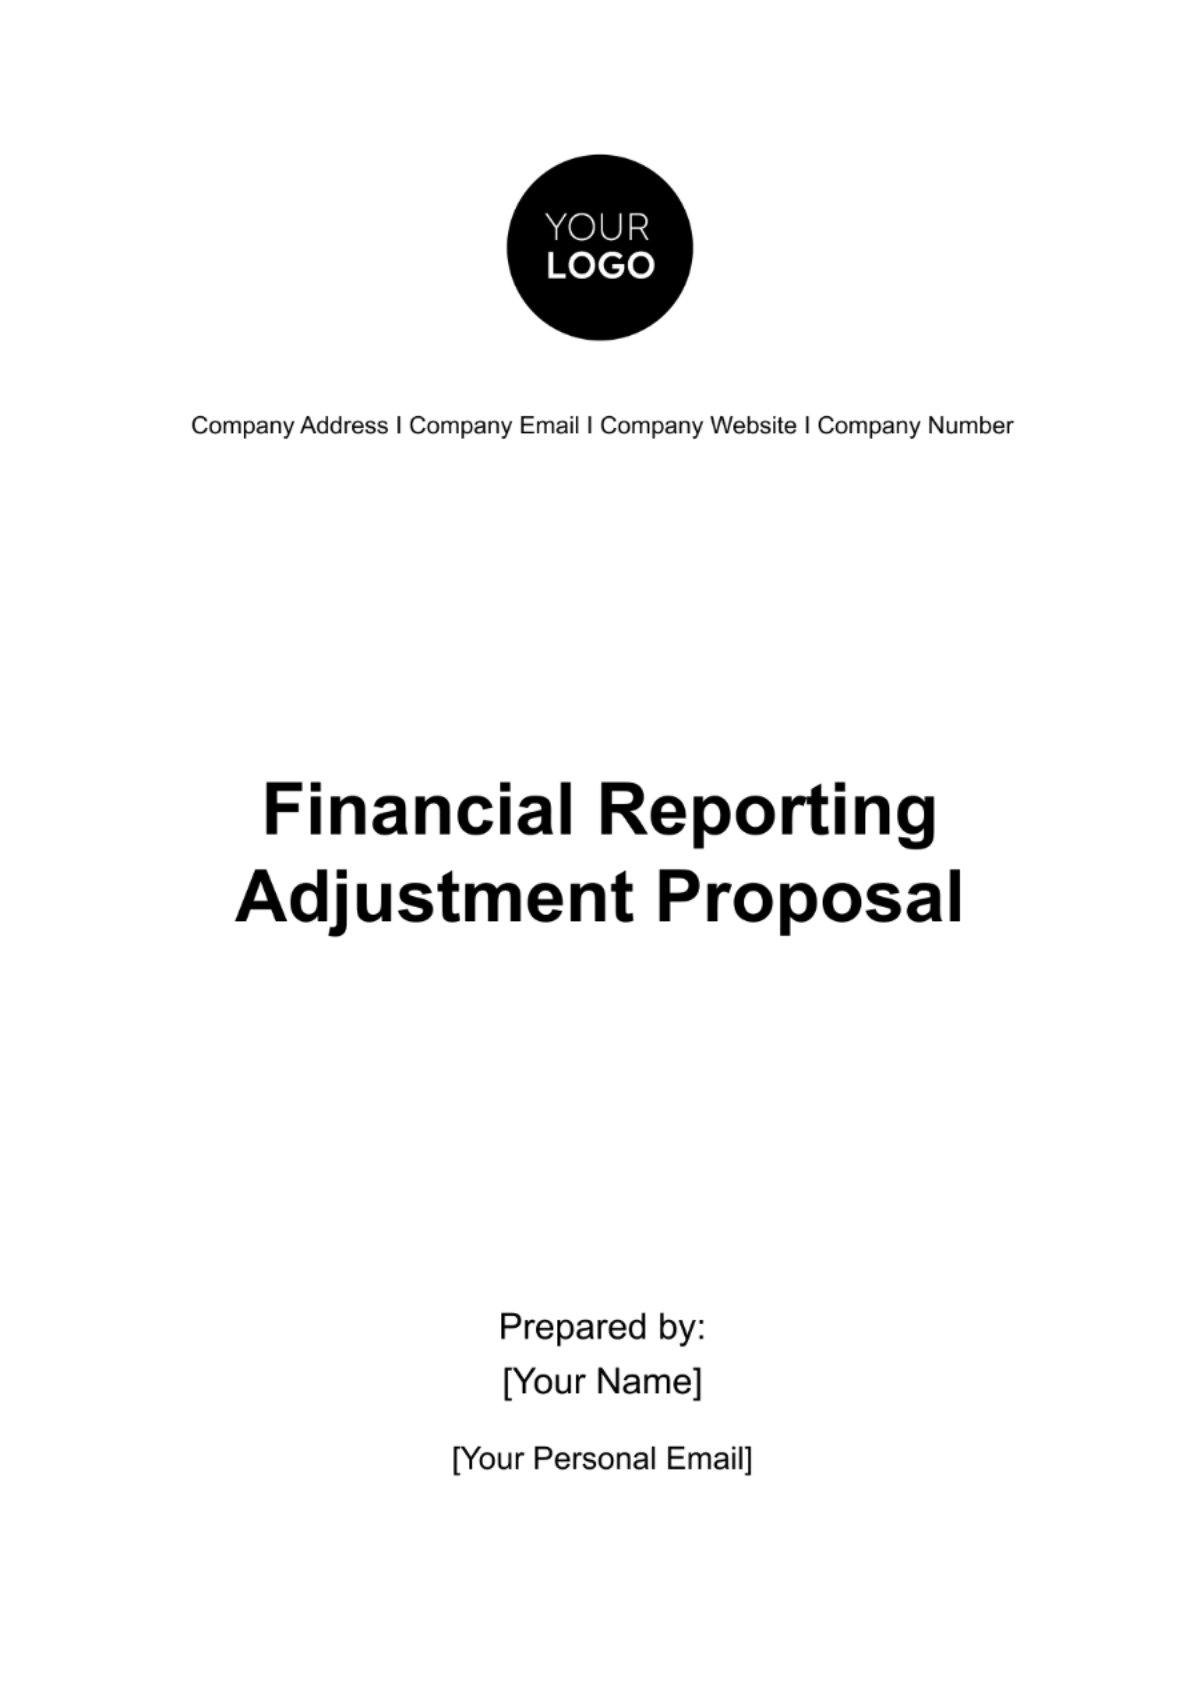 Free Financial Reporting Adjustment Proposal Template